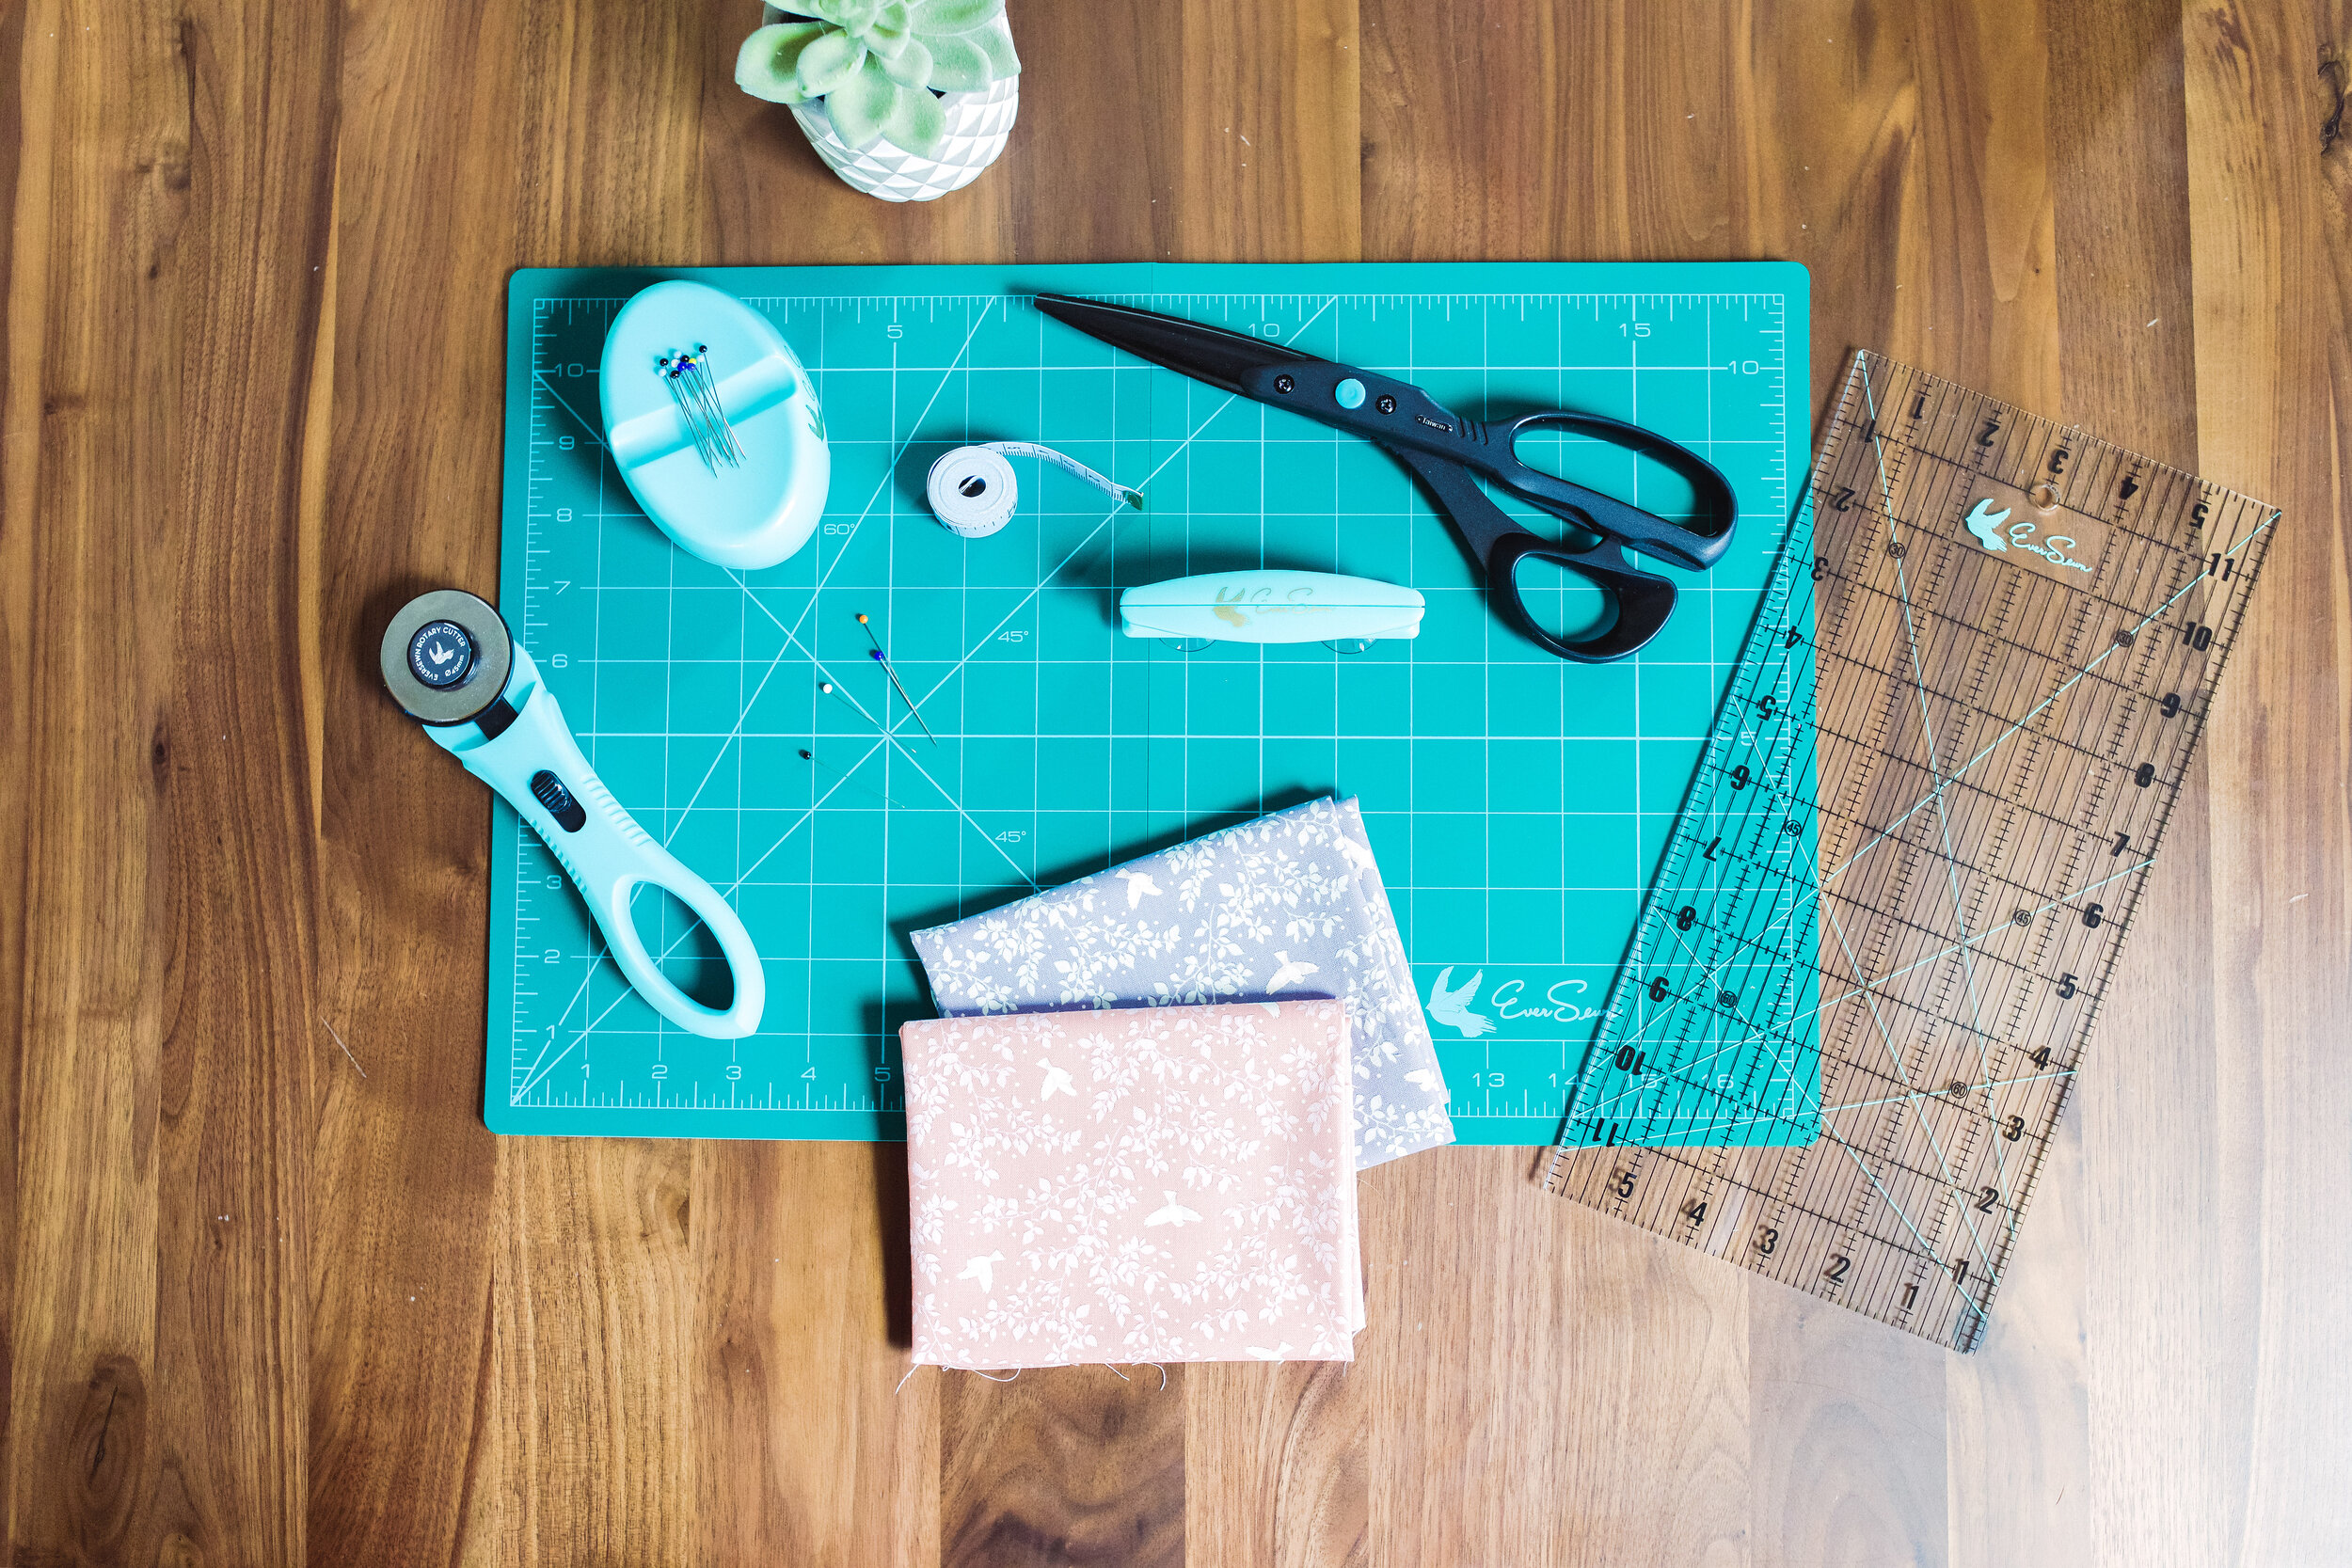 Crafters Corner : Trimmers & Scissors 101: A Beginner's Guide to Cutting